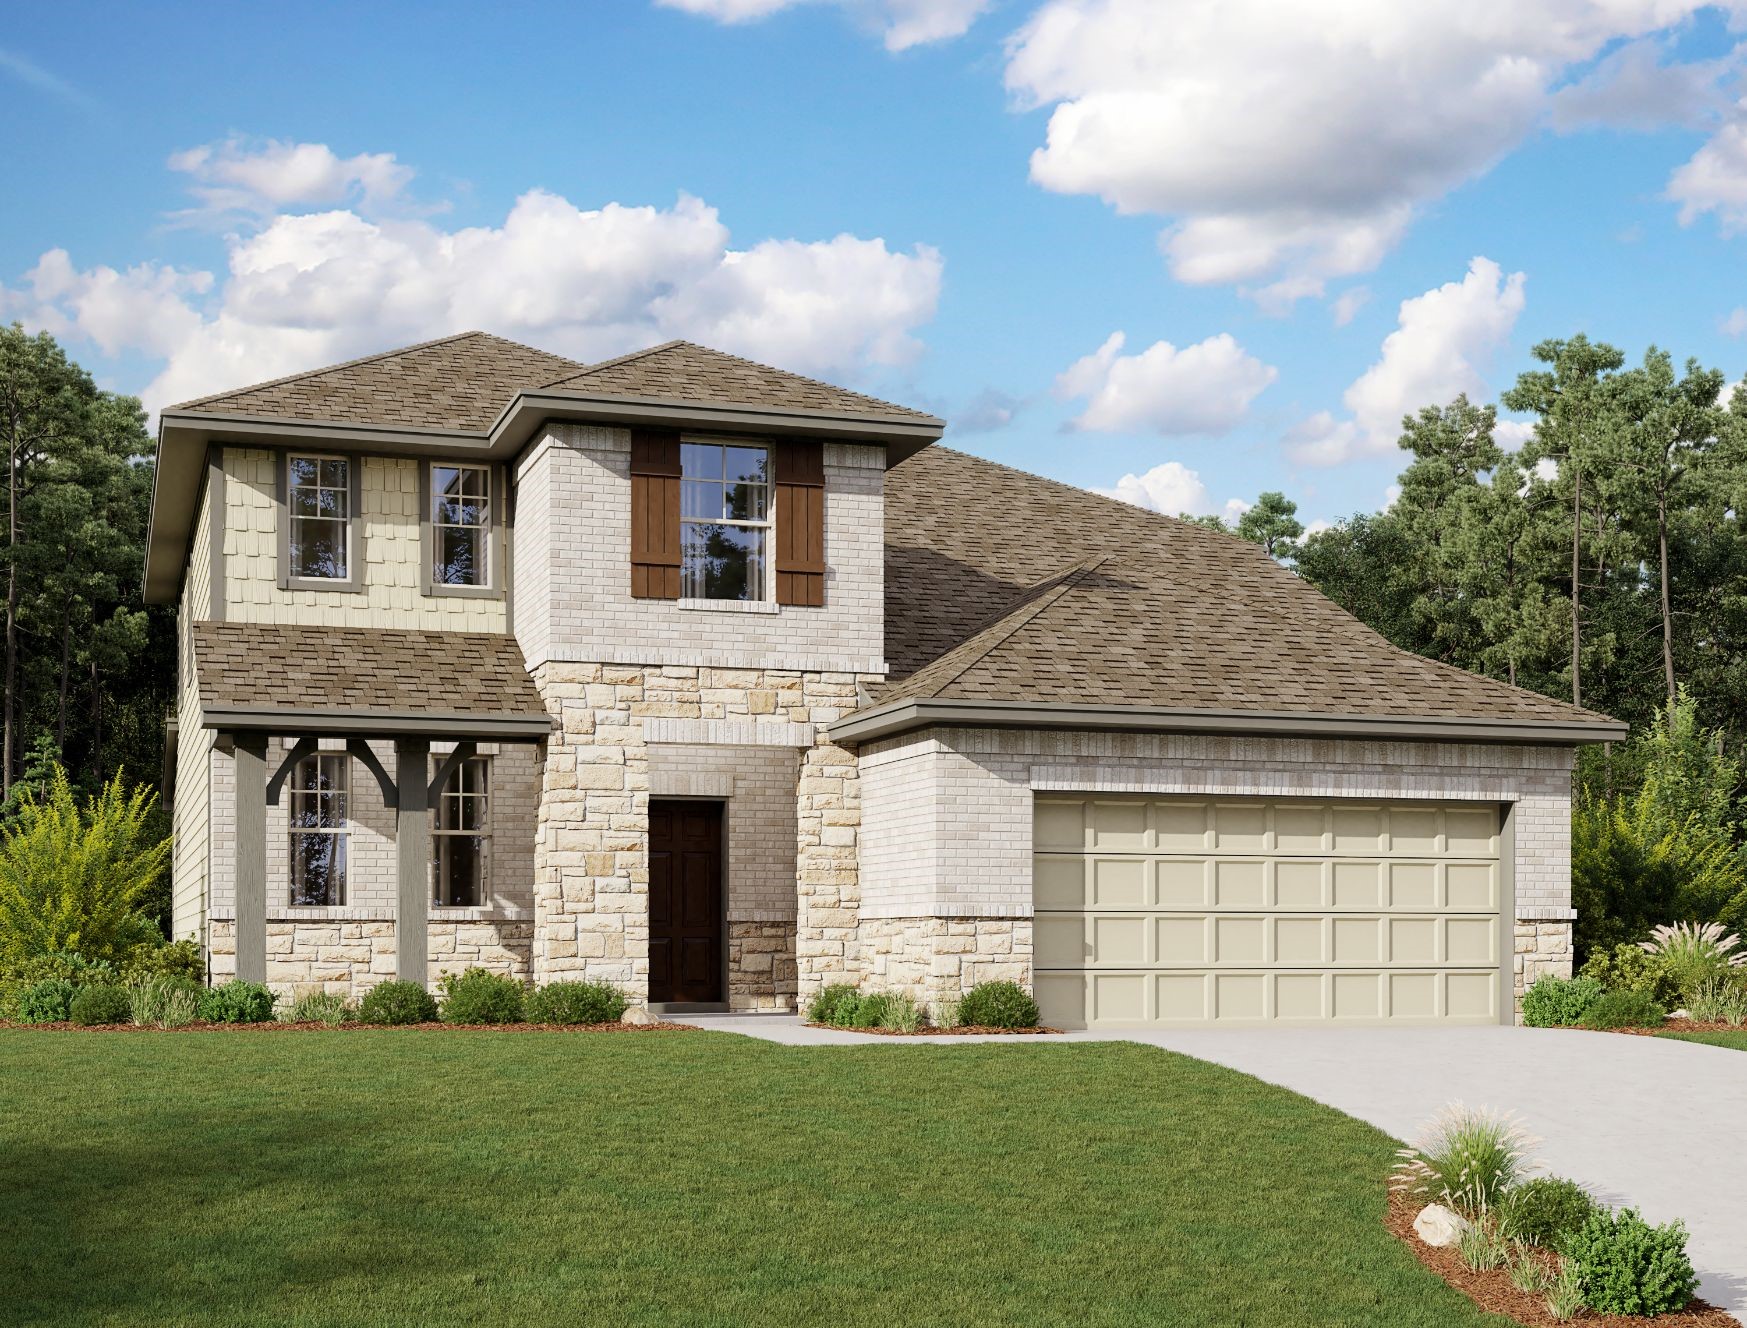 Welcome home to 32319 Elmwood Manor located in the Oakwood Estates community zoned to Waller ISD.